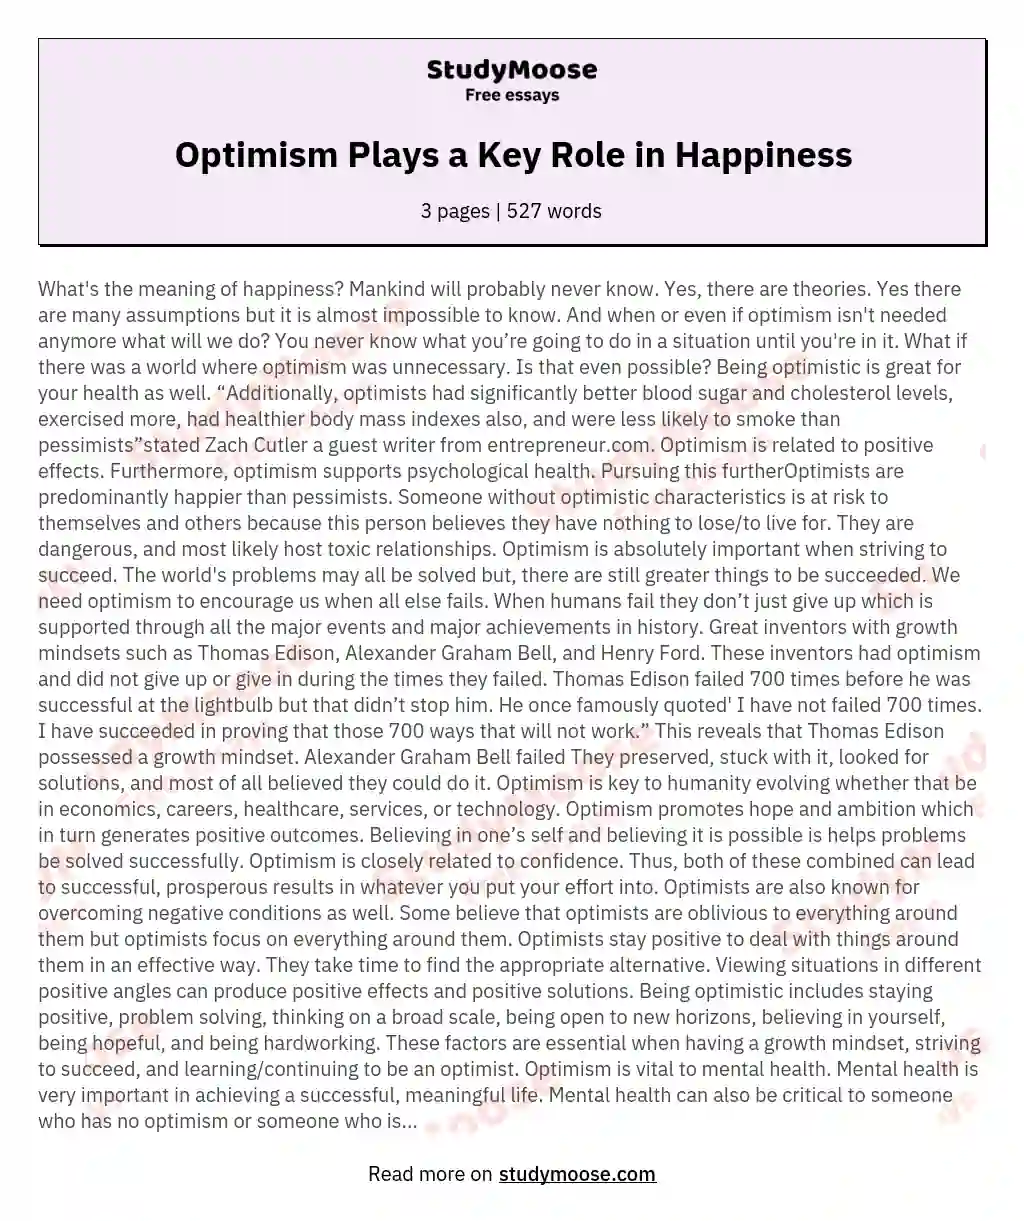 Optimism Plays a Key Role in Happiness essay